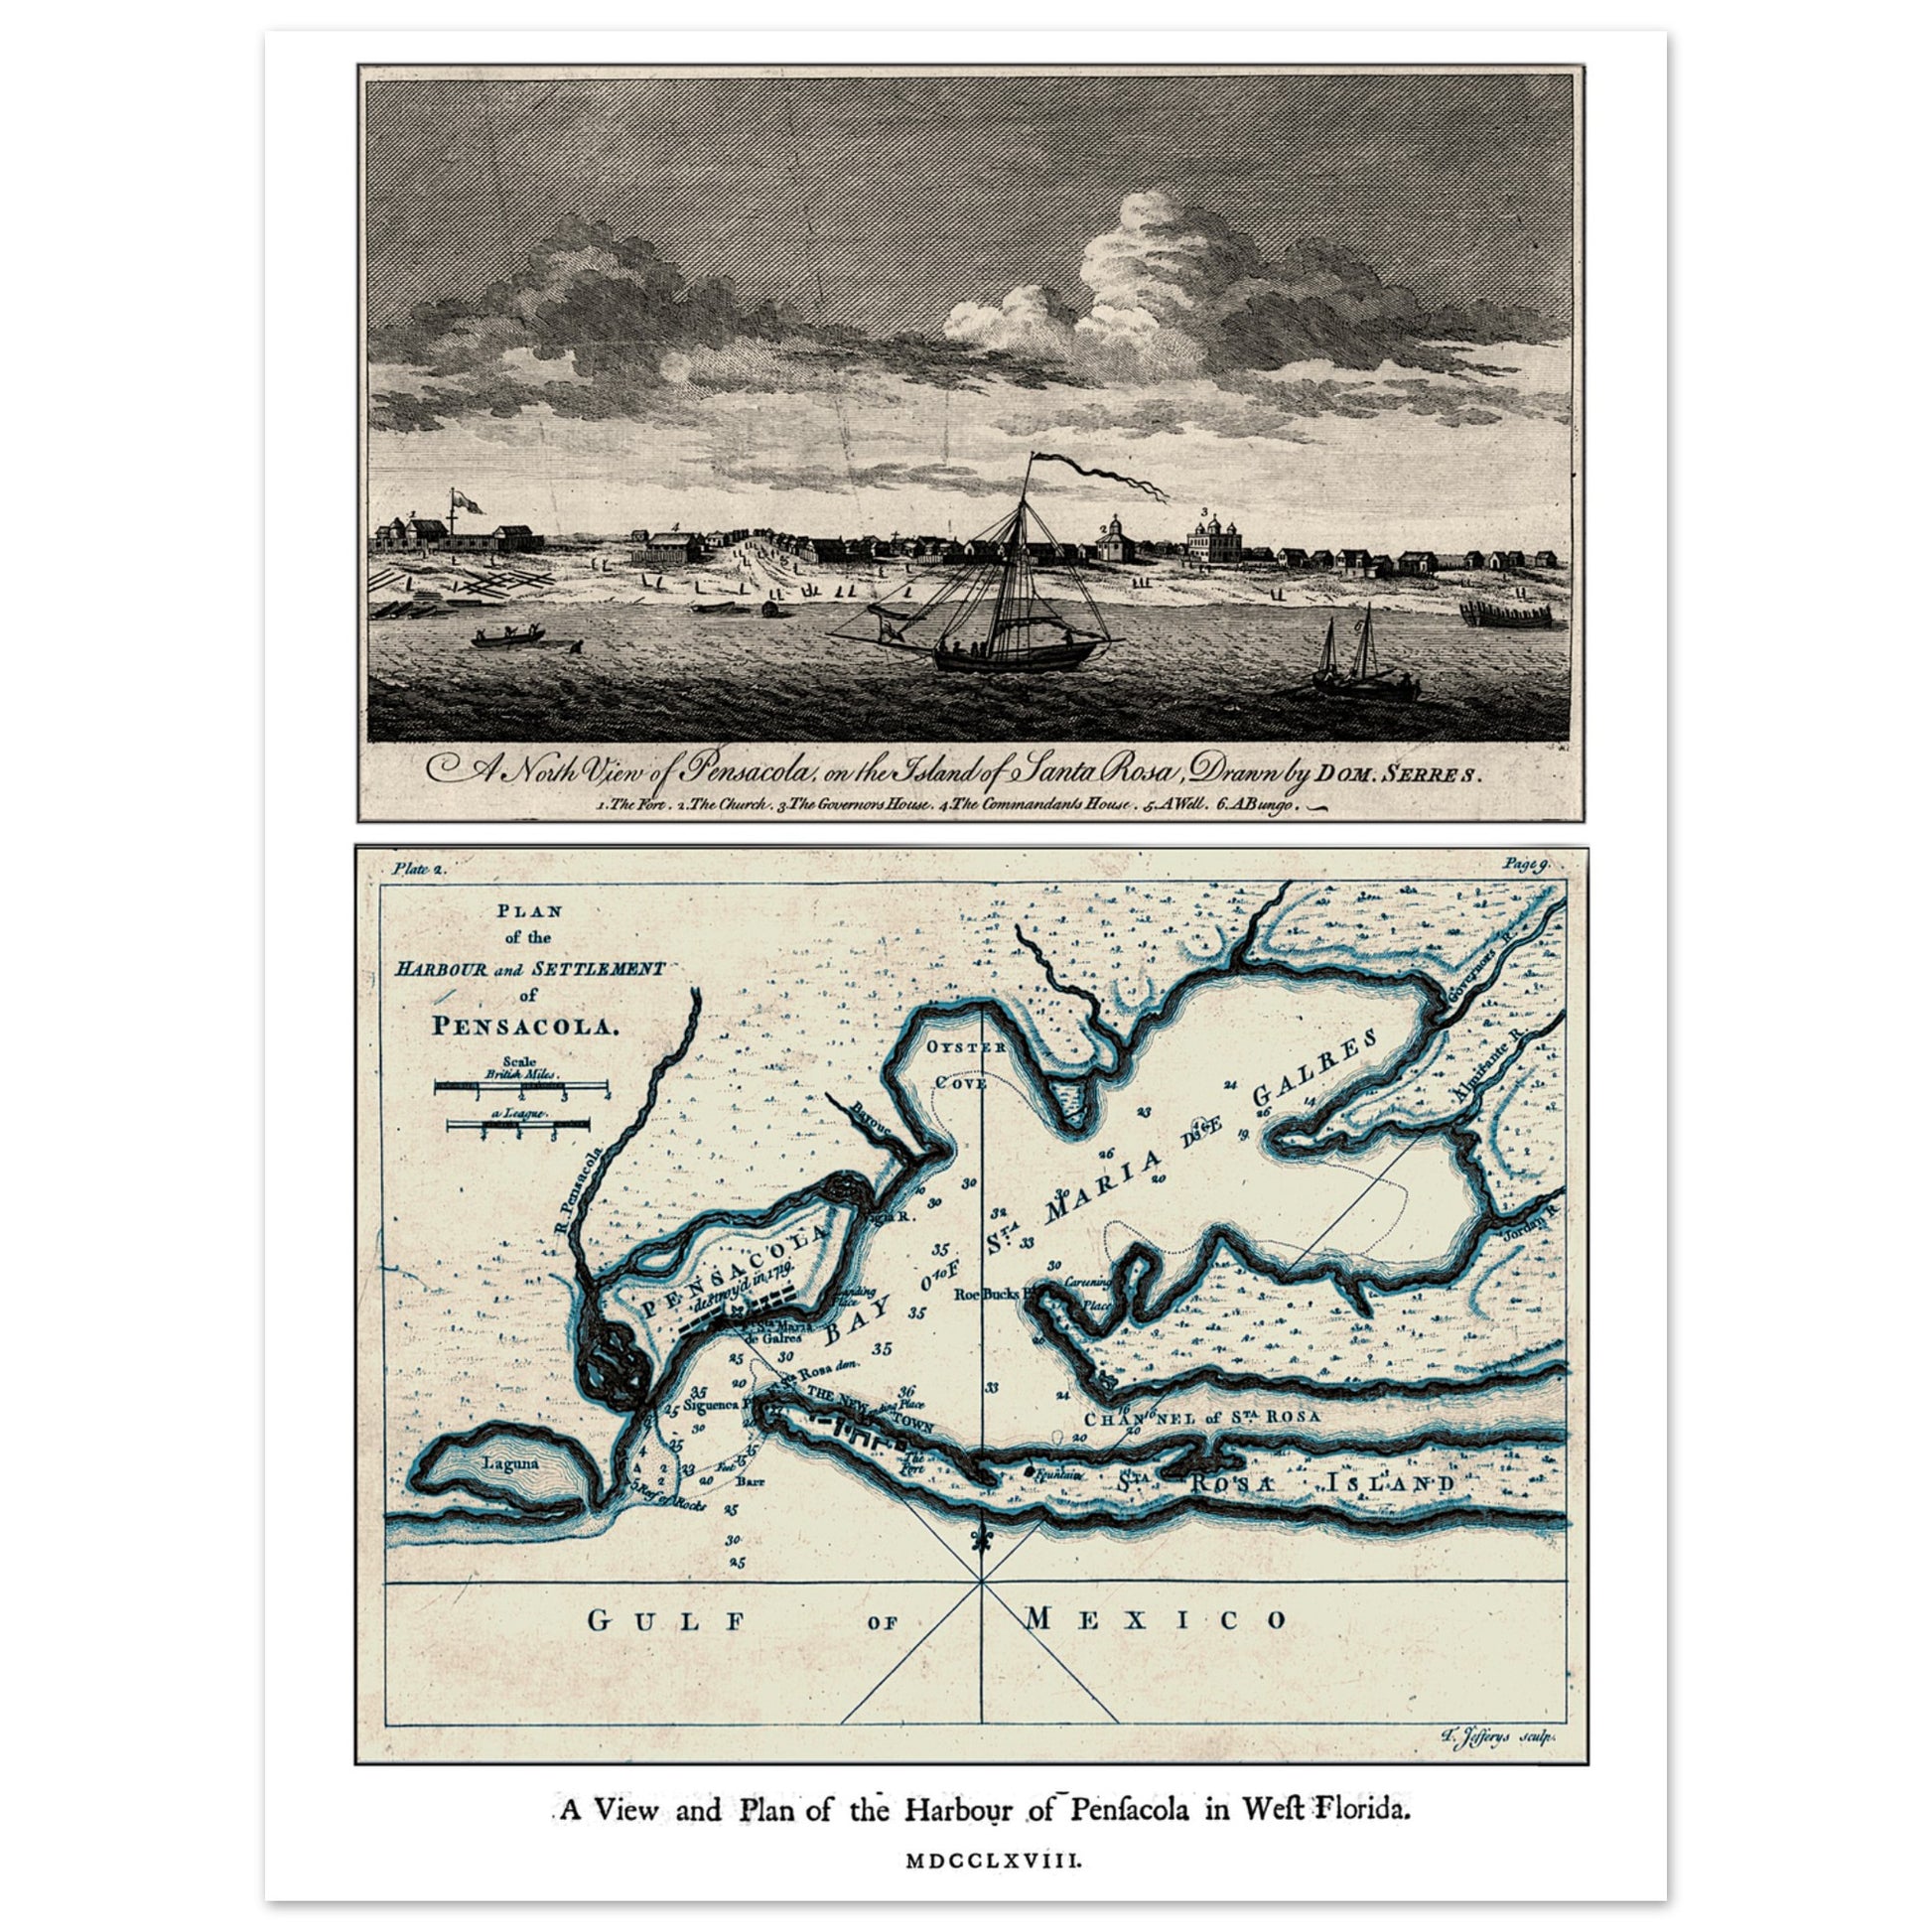 Images of 1768 Pensacola (one from Santa Rosa and one a nautical chart)